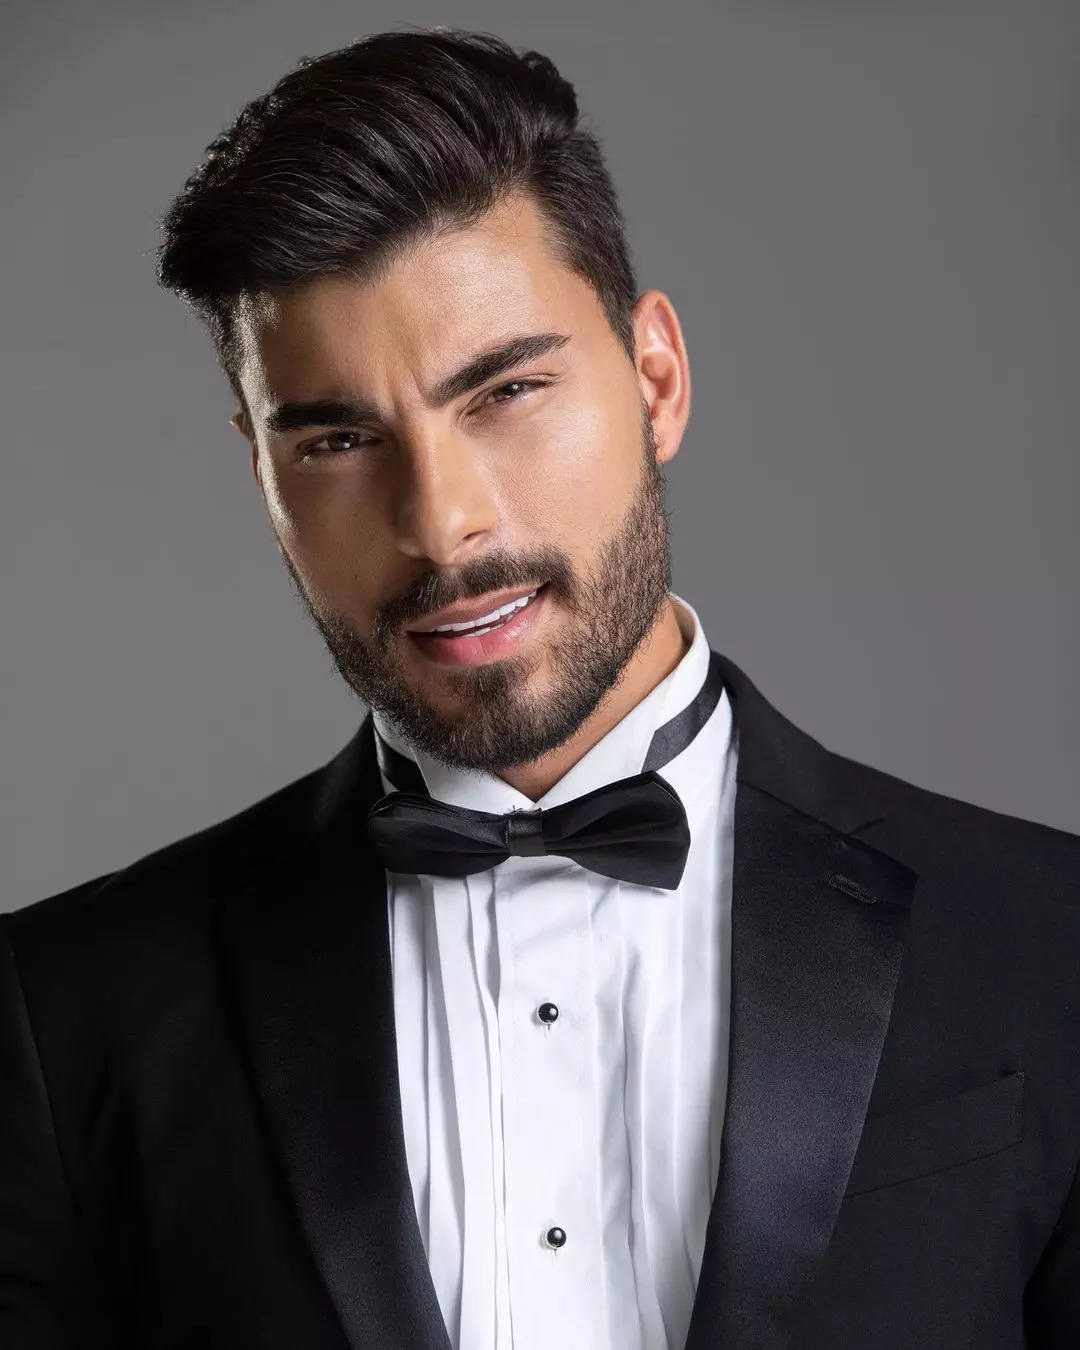 Meet the Top 20 of Mister Supranational 2021